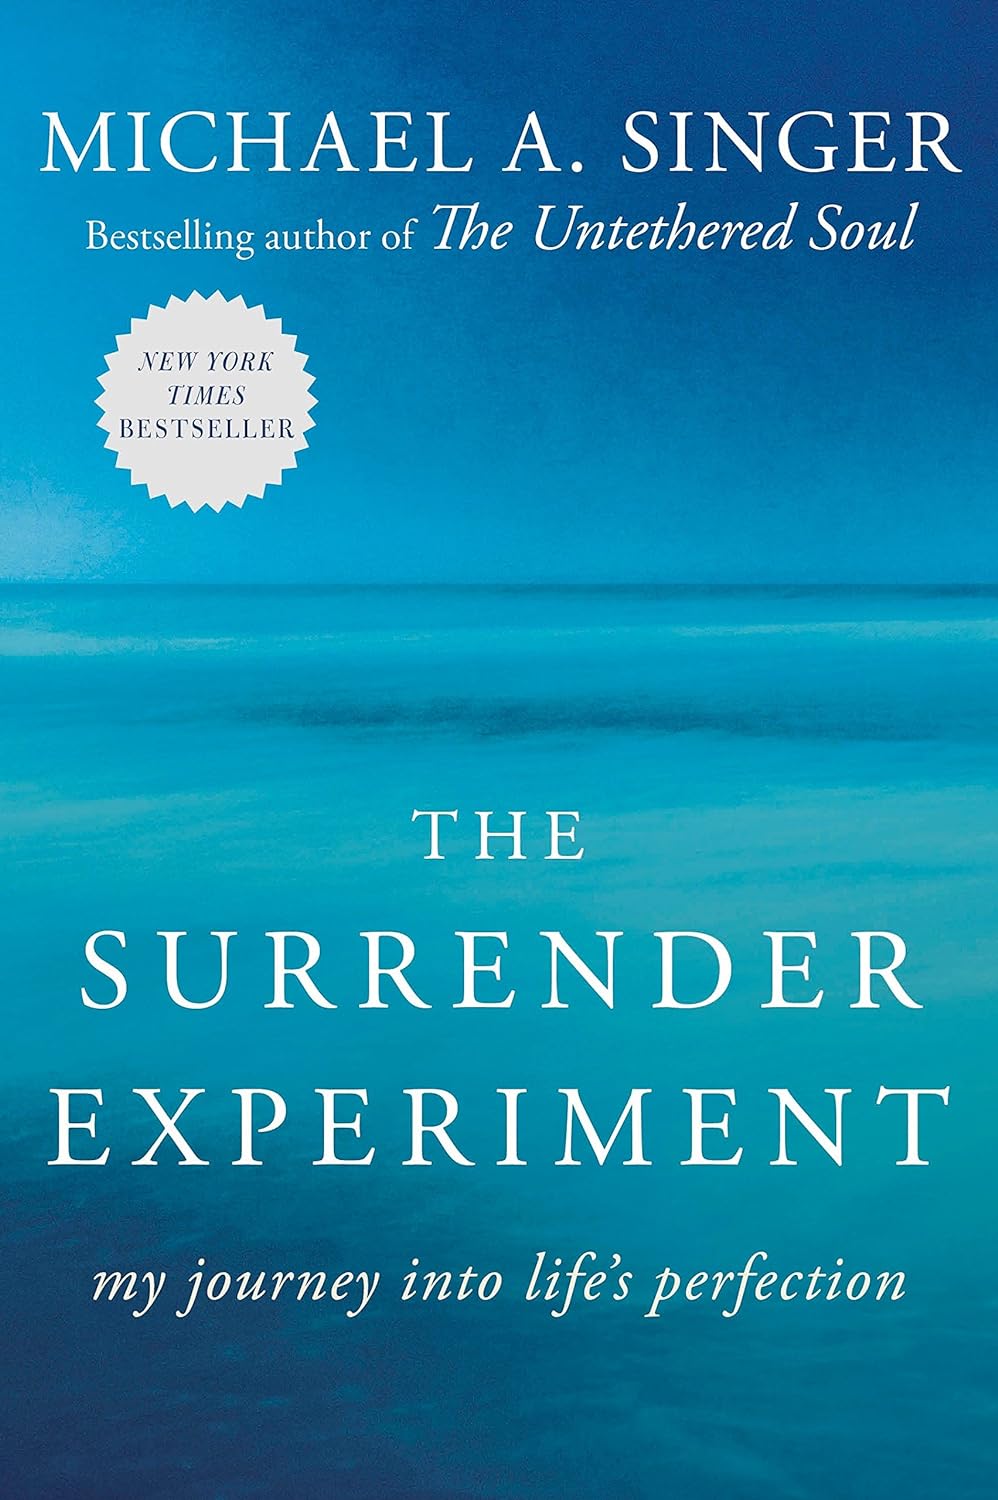 In The Surrender Experiment, Michael A. Singer tells the extraordinary story of what happened when, after a deep spiritual awakening, he decided to relinquish his personal fears and desires and simply let life unfold before him. Singer shares how this pivotal decision to embrace the flow of life led him to extraordinary success, sustained him through times of crisis, and allowed him to cultivate profound inner peace—whether as a young man pursuing a life of solitude in the woods, the founder of a thriving spiritual community in Florida, or the CEO of a billion-dollar medical software company.